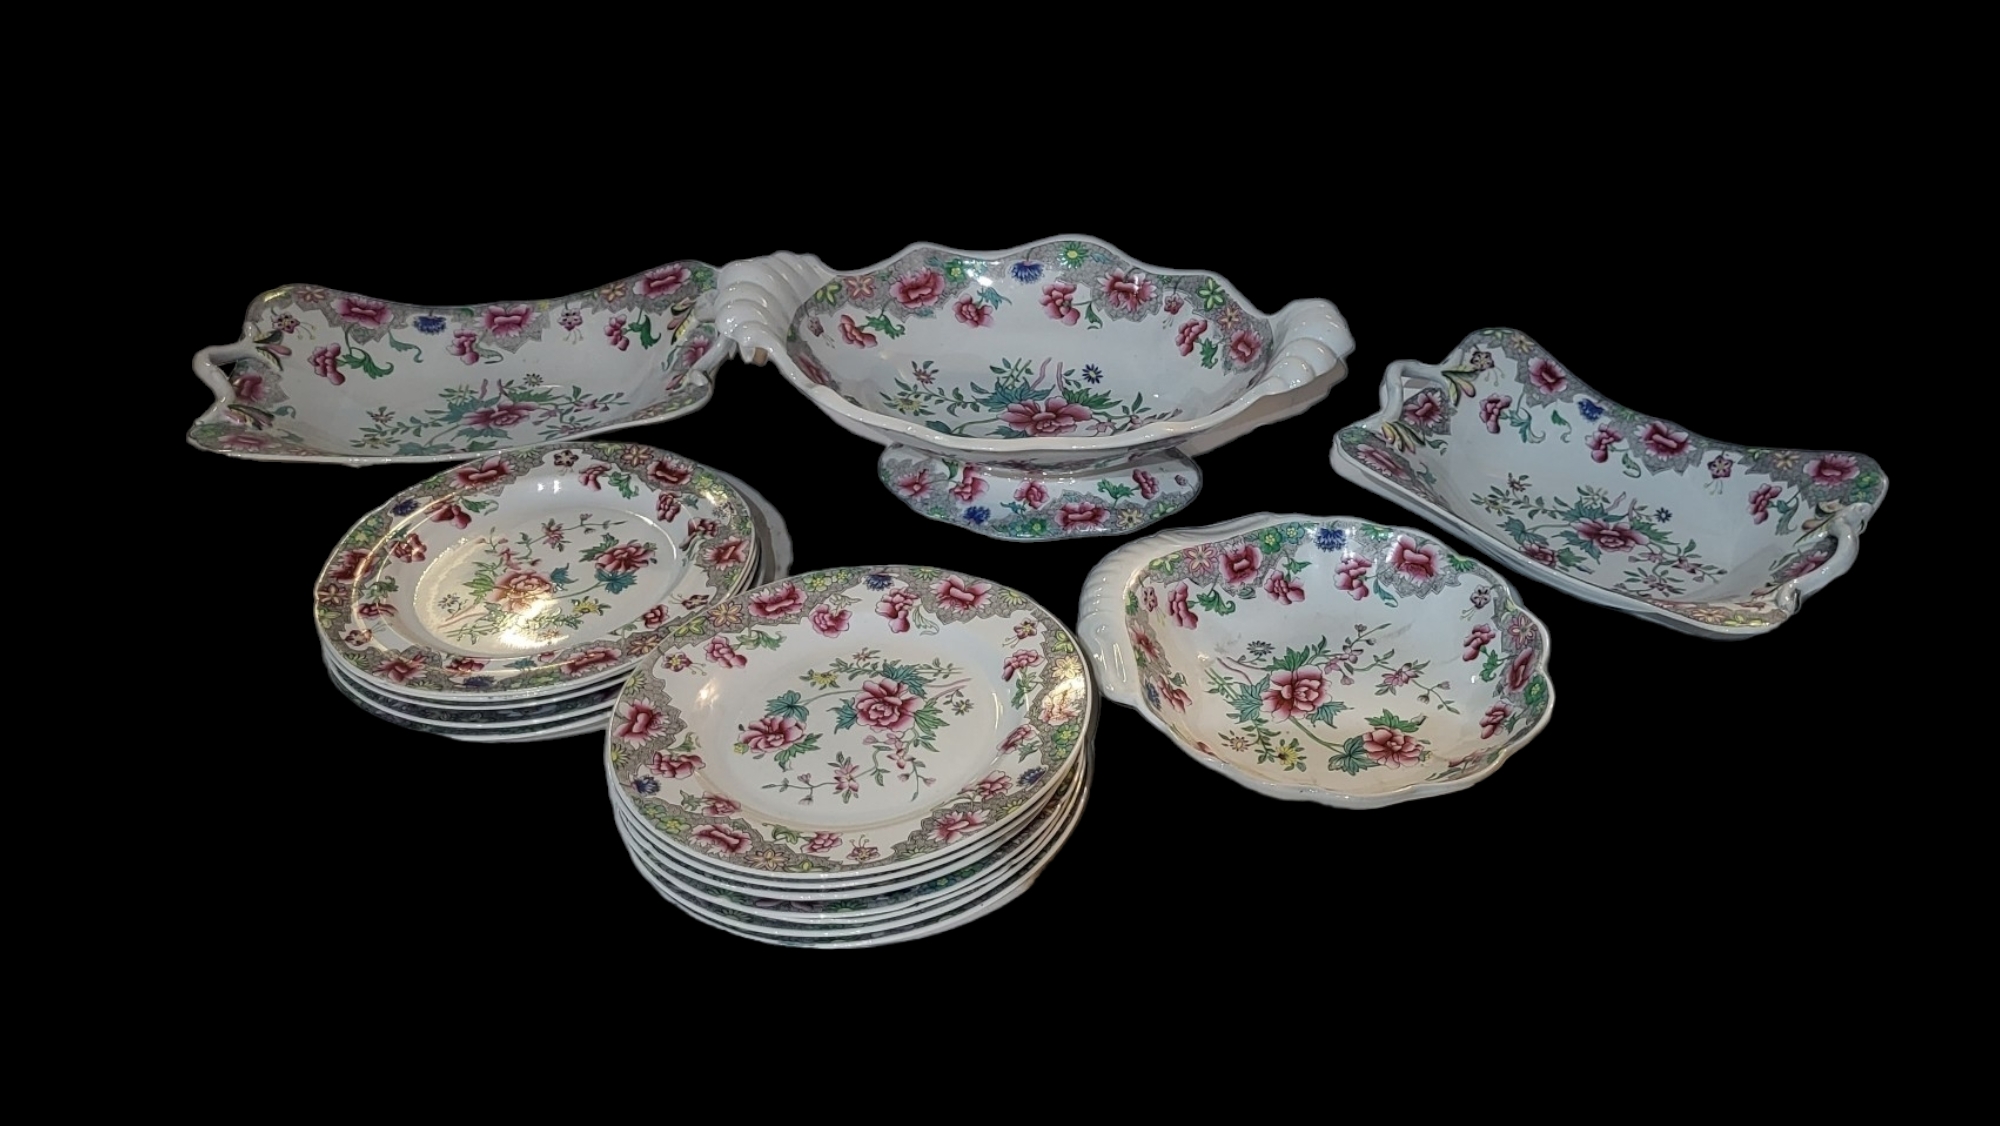 SPODE, A LATE 19TH/EARLY 20TH CENTURY' FAMILLE ROSE 'STONE CHINA PART DINNER SERVICE Comprising